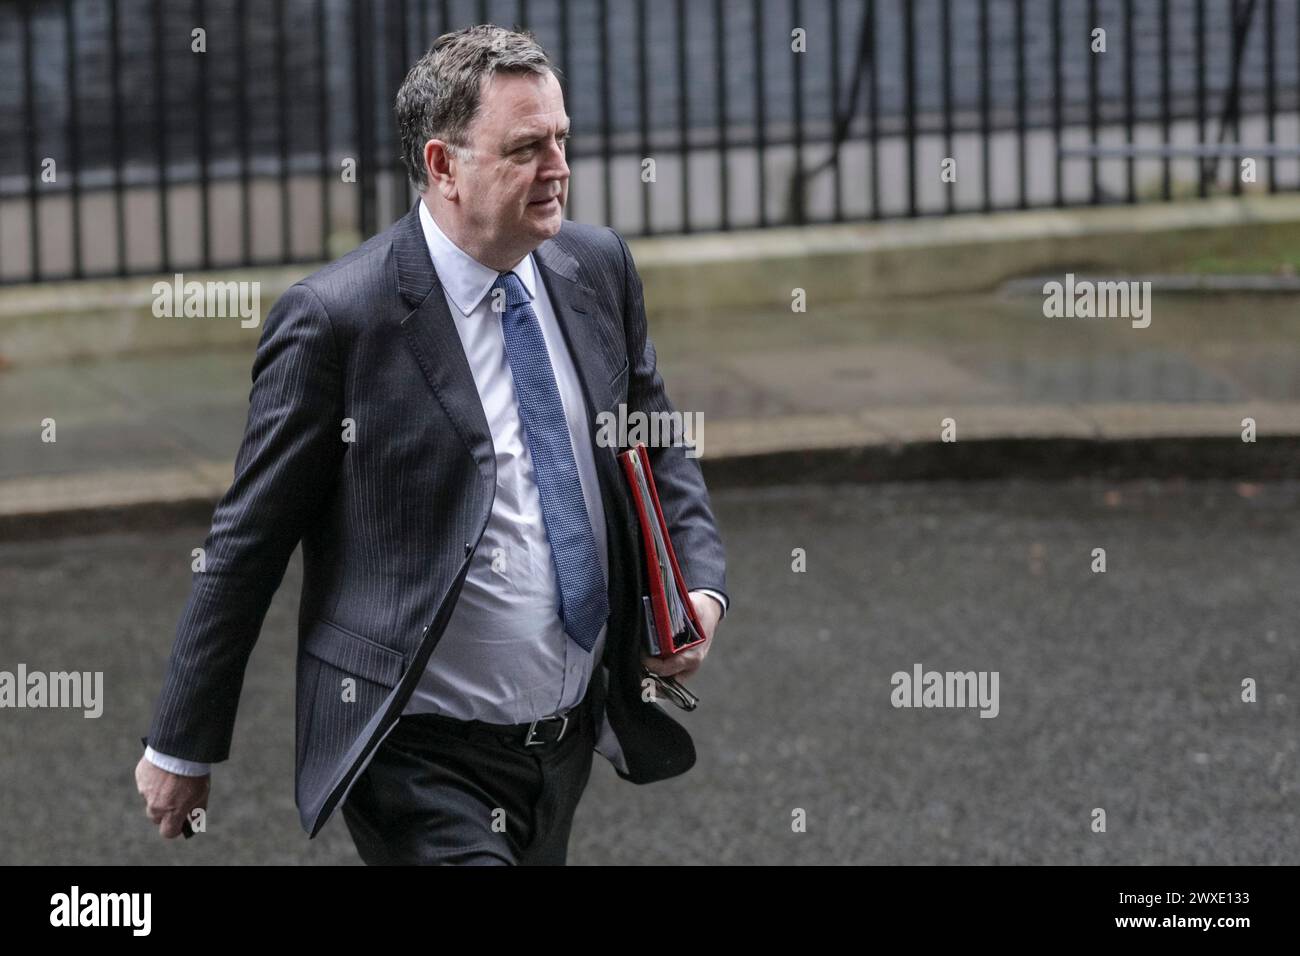 Mel Stride, MP, Secretary of State for Work and Pensions, at 10 Downing Street, London, England, UK Stock Photo